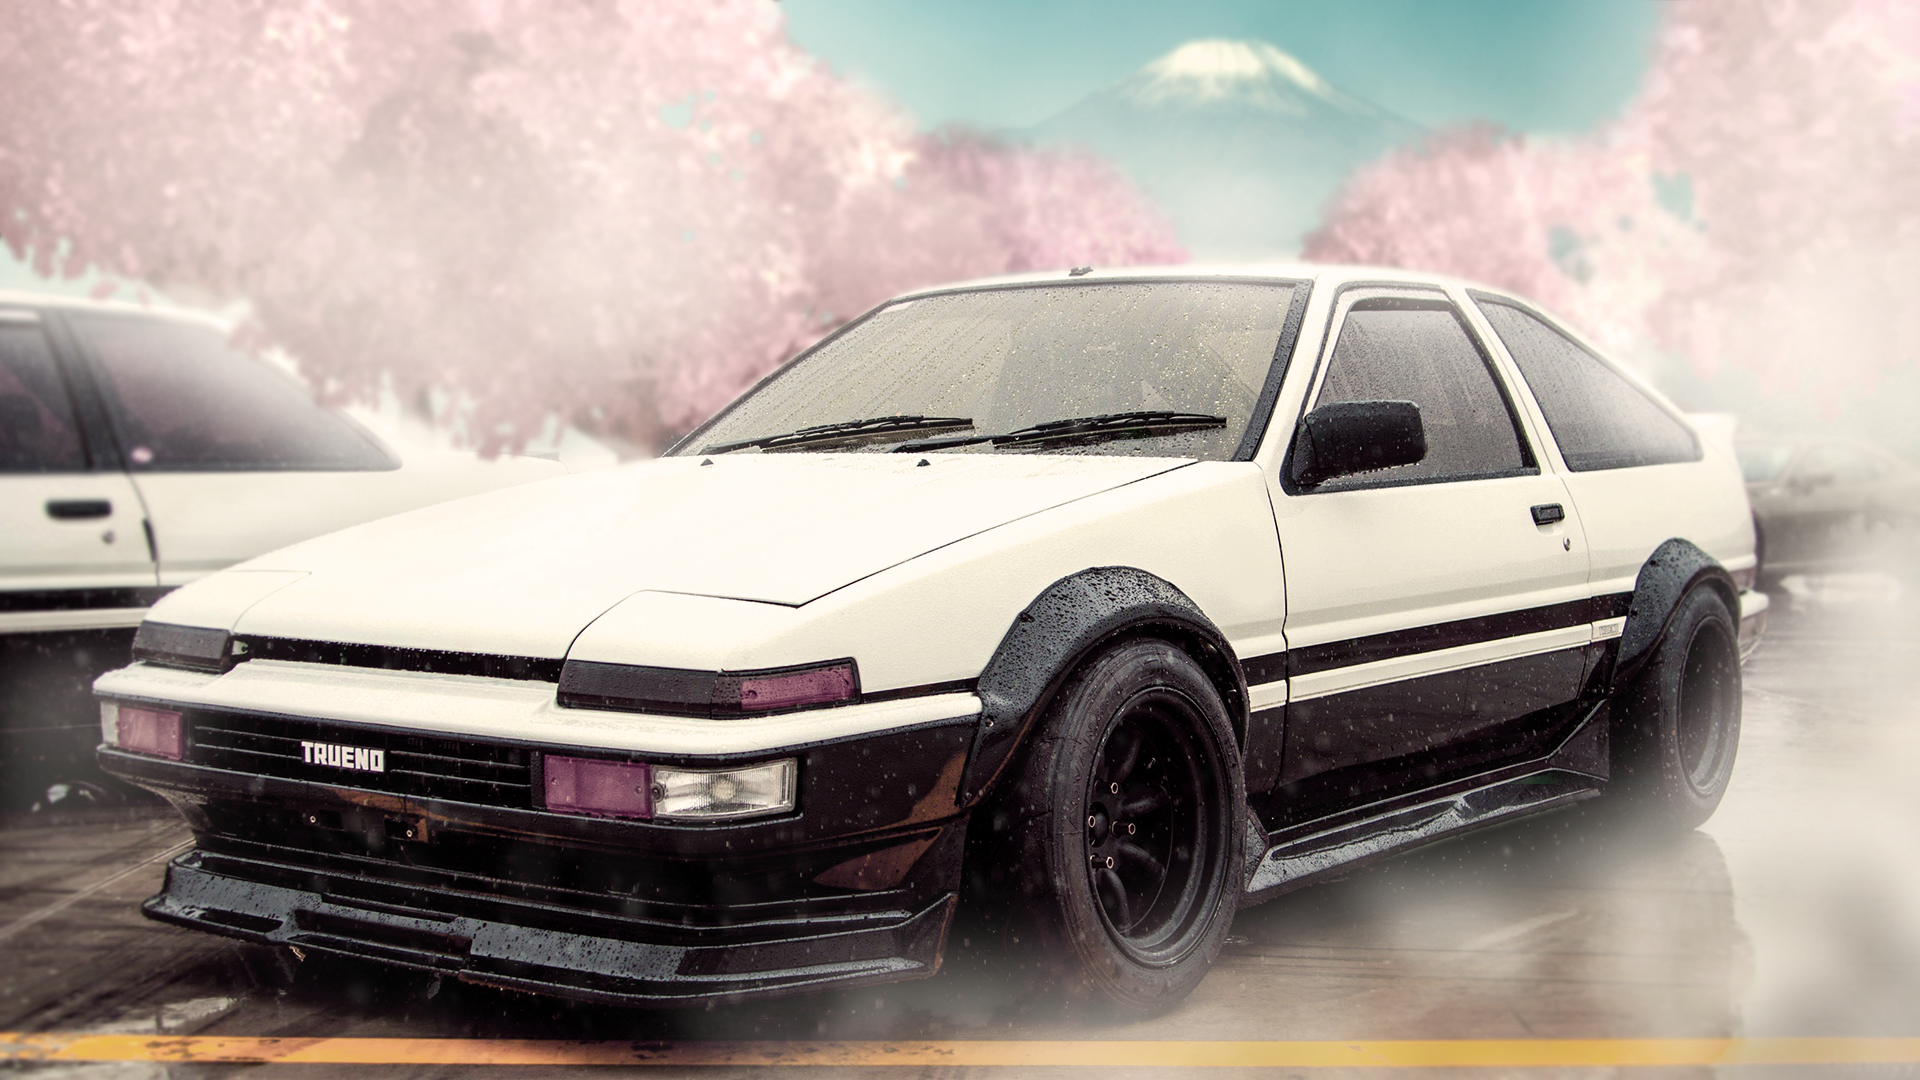 Free download AE86 wallpaper i made for my computer not very good but [1920x1080] for your Desktop, Mobile & Tablet. Explore Toyota AE86 Wallpaper. Toyota AE86 Wallpaper, AE86 Drift